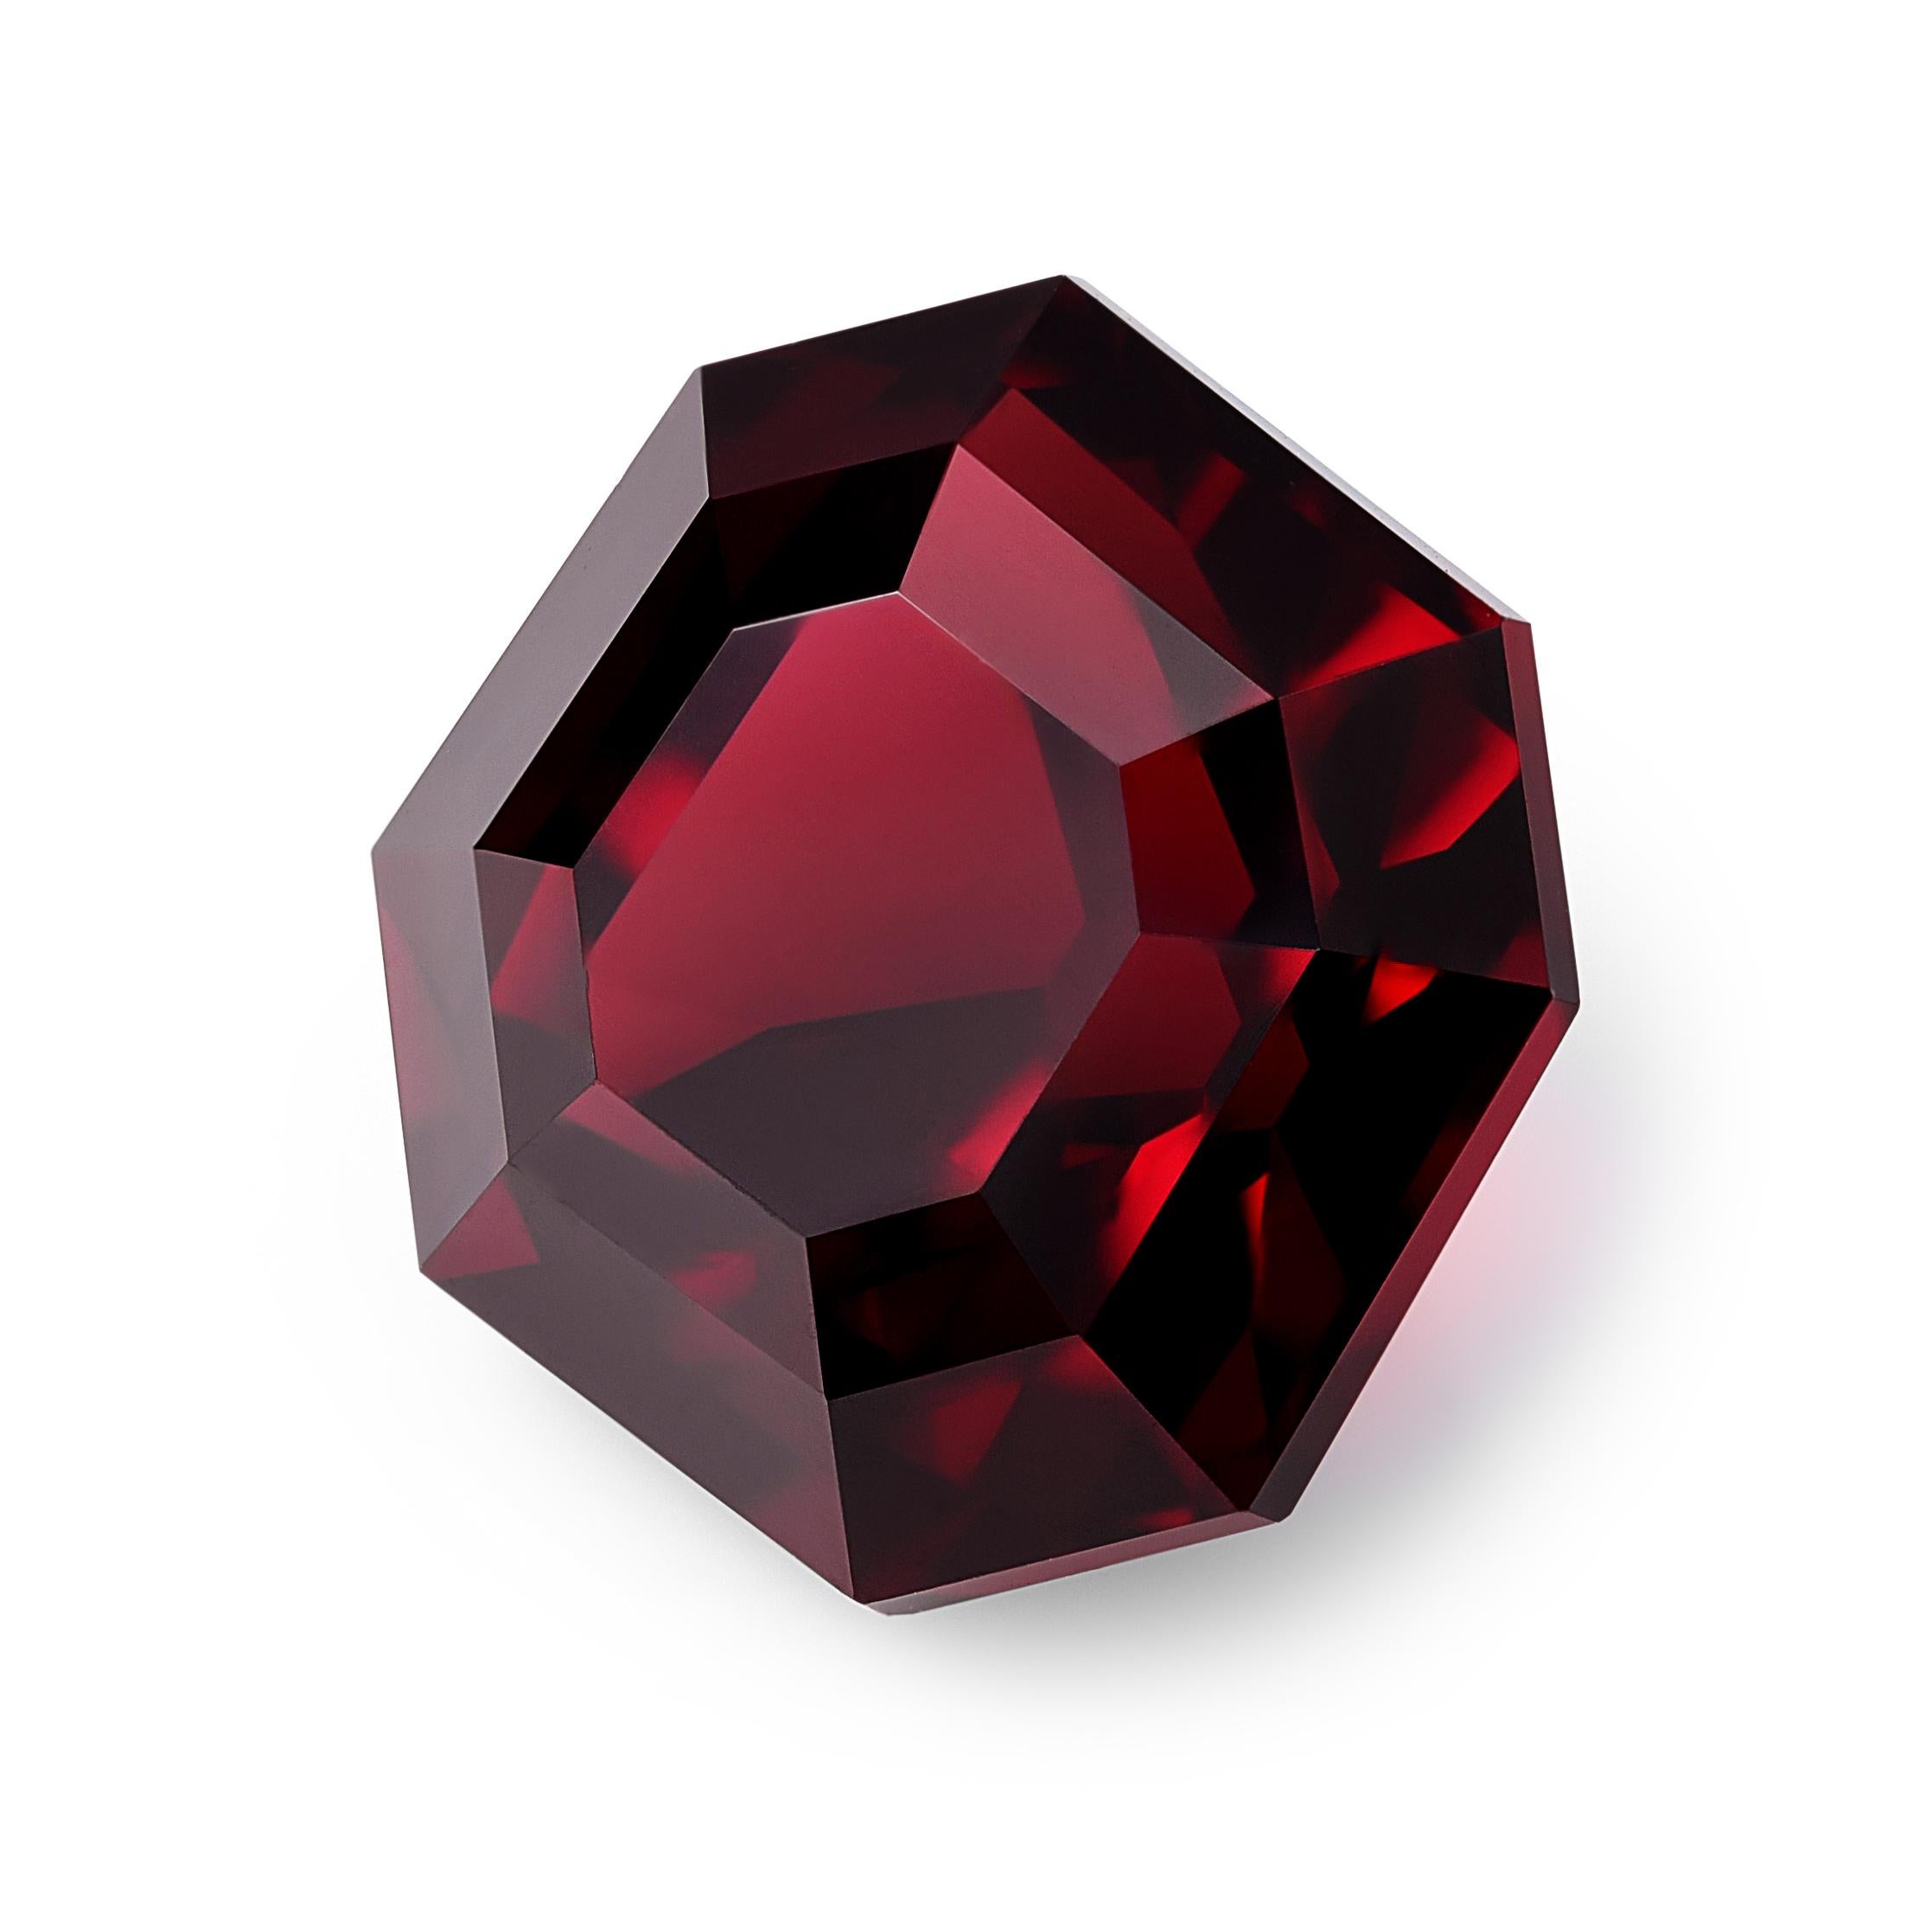 Weighing an impressive 14.05 carats, this natural garnet is a striking gemstone with an octagon shape, featuring eight sides and cut corners. Measuring 13.14 x 13.38 x 9.52 mm, it presents a substantial and visually appealing presence. The